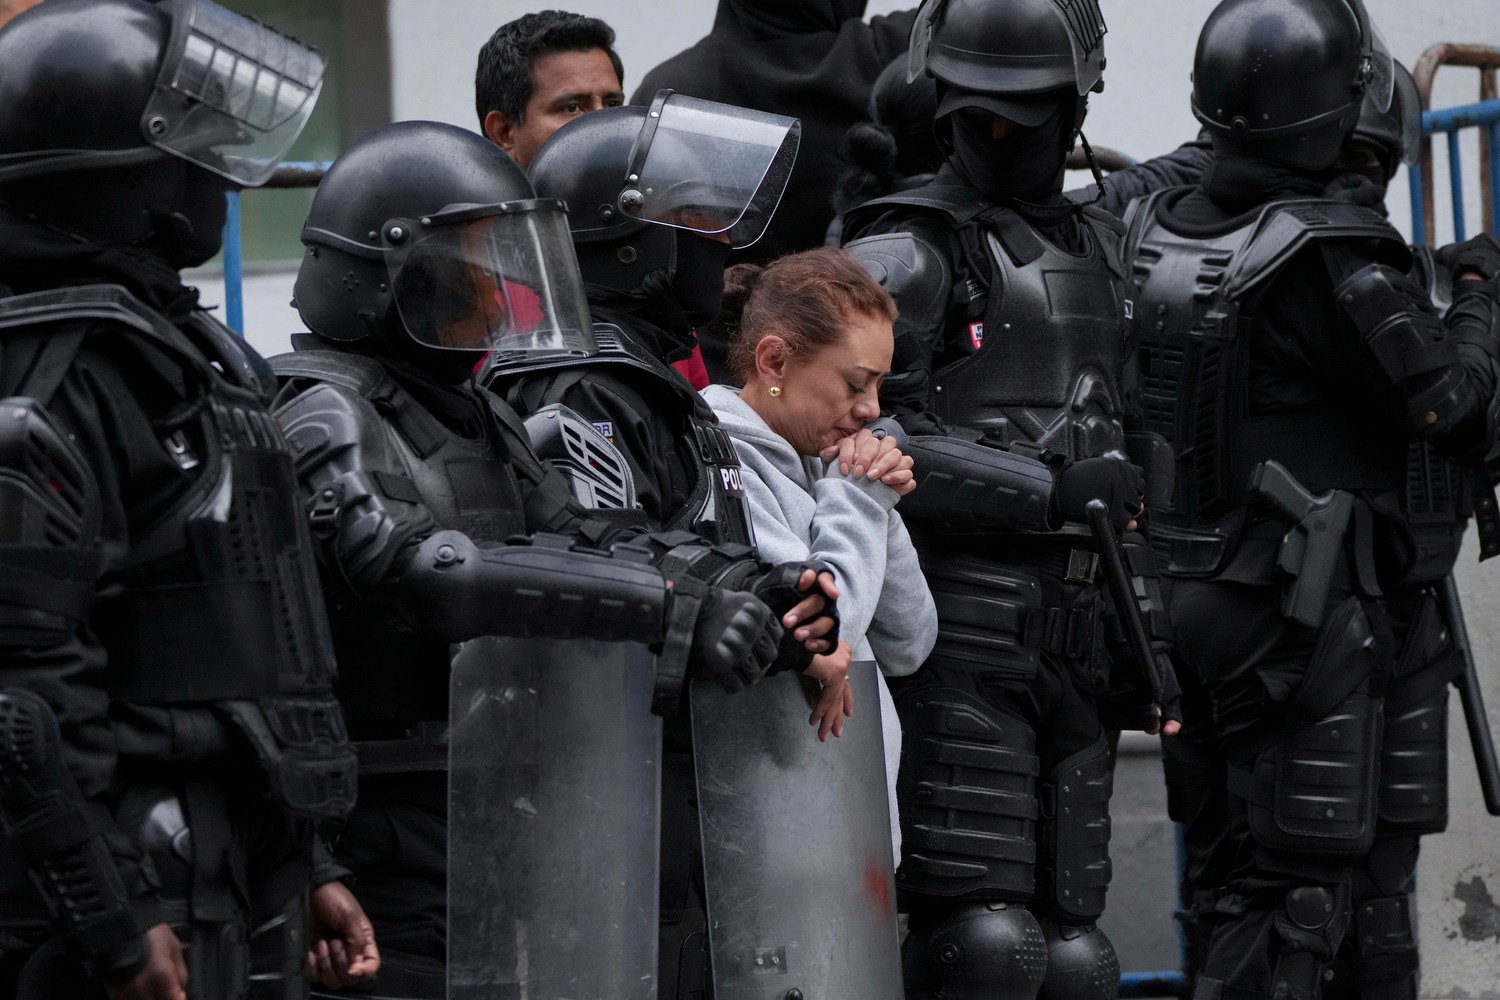  A supporter of former Ecuadorian Vice President Jorge Glas stands outside the detention center where he was taken after police broke into the Mexican Embassy to arrest him, in Quito, Ecuador, April 6, 2024. Glas took refuge in the Mexican embassy in